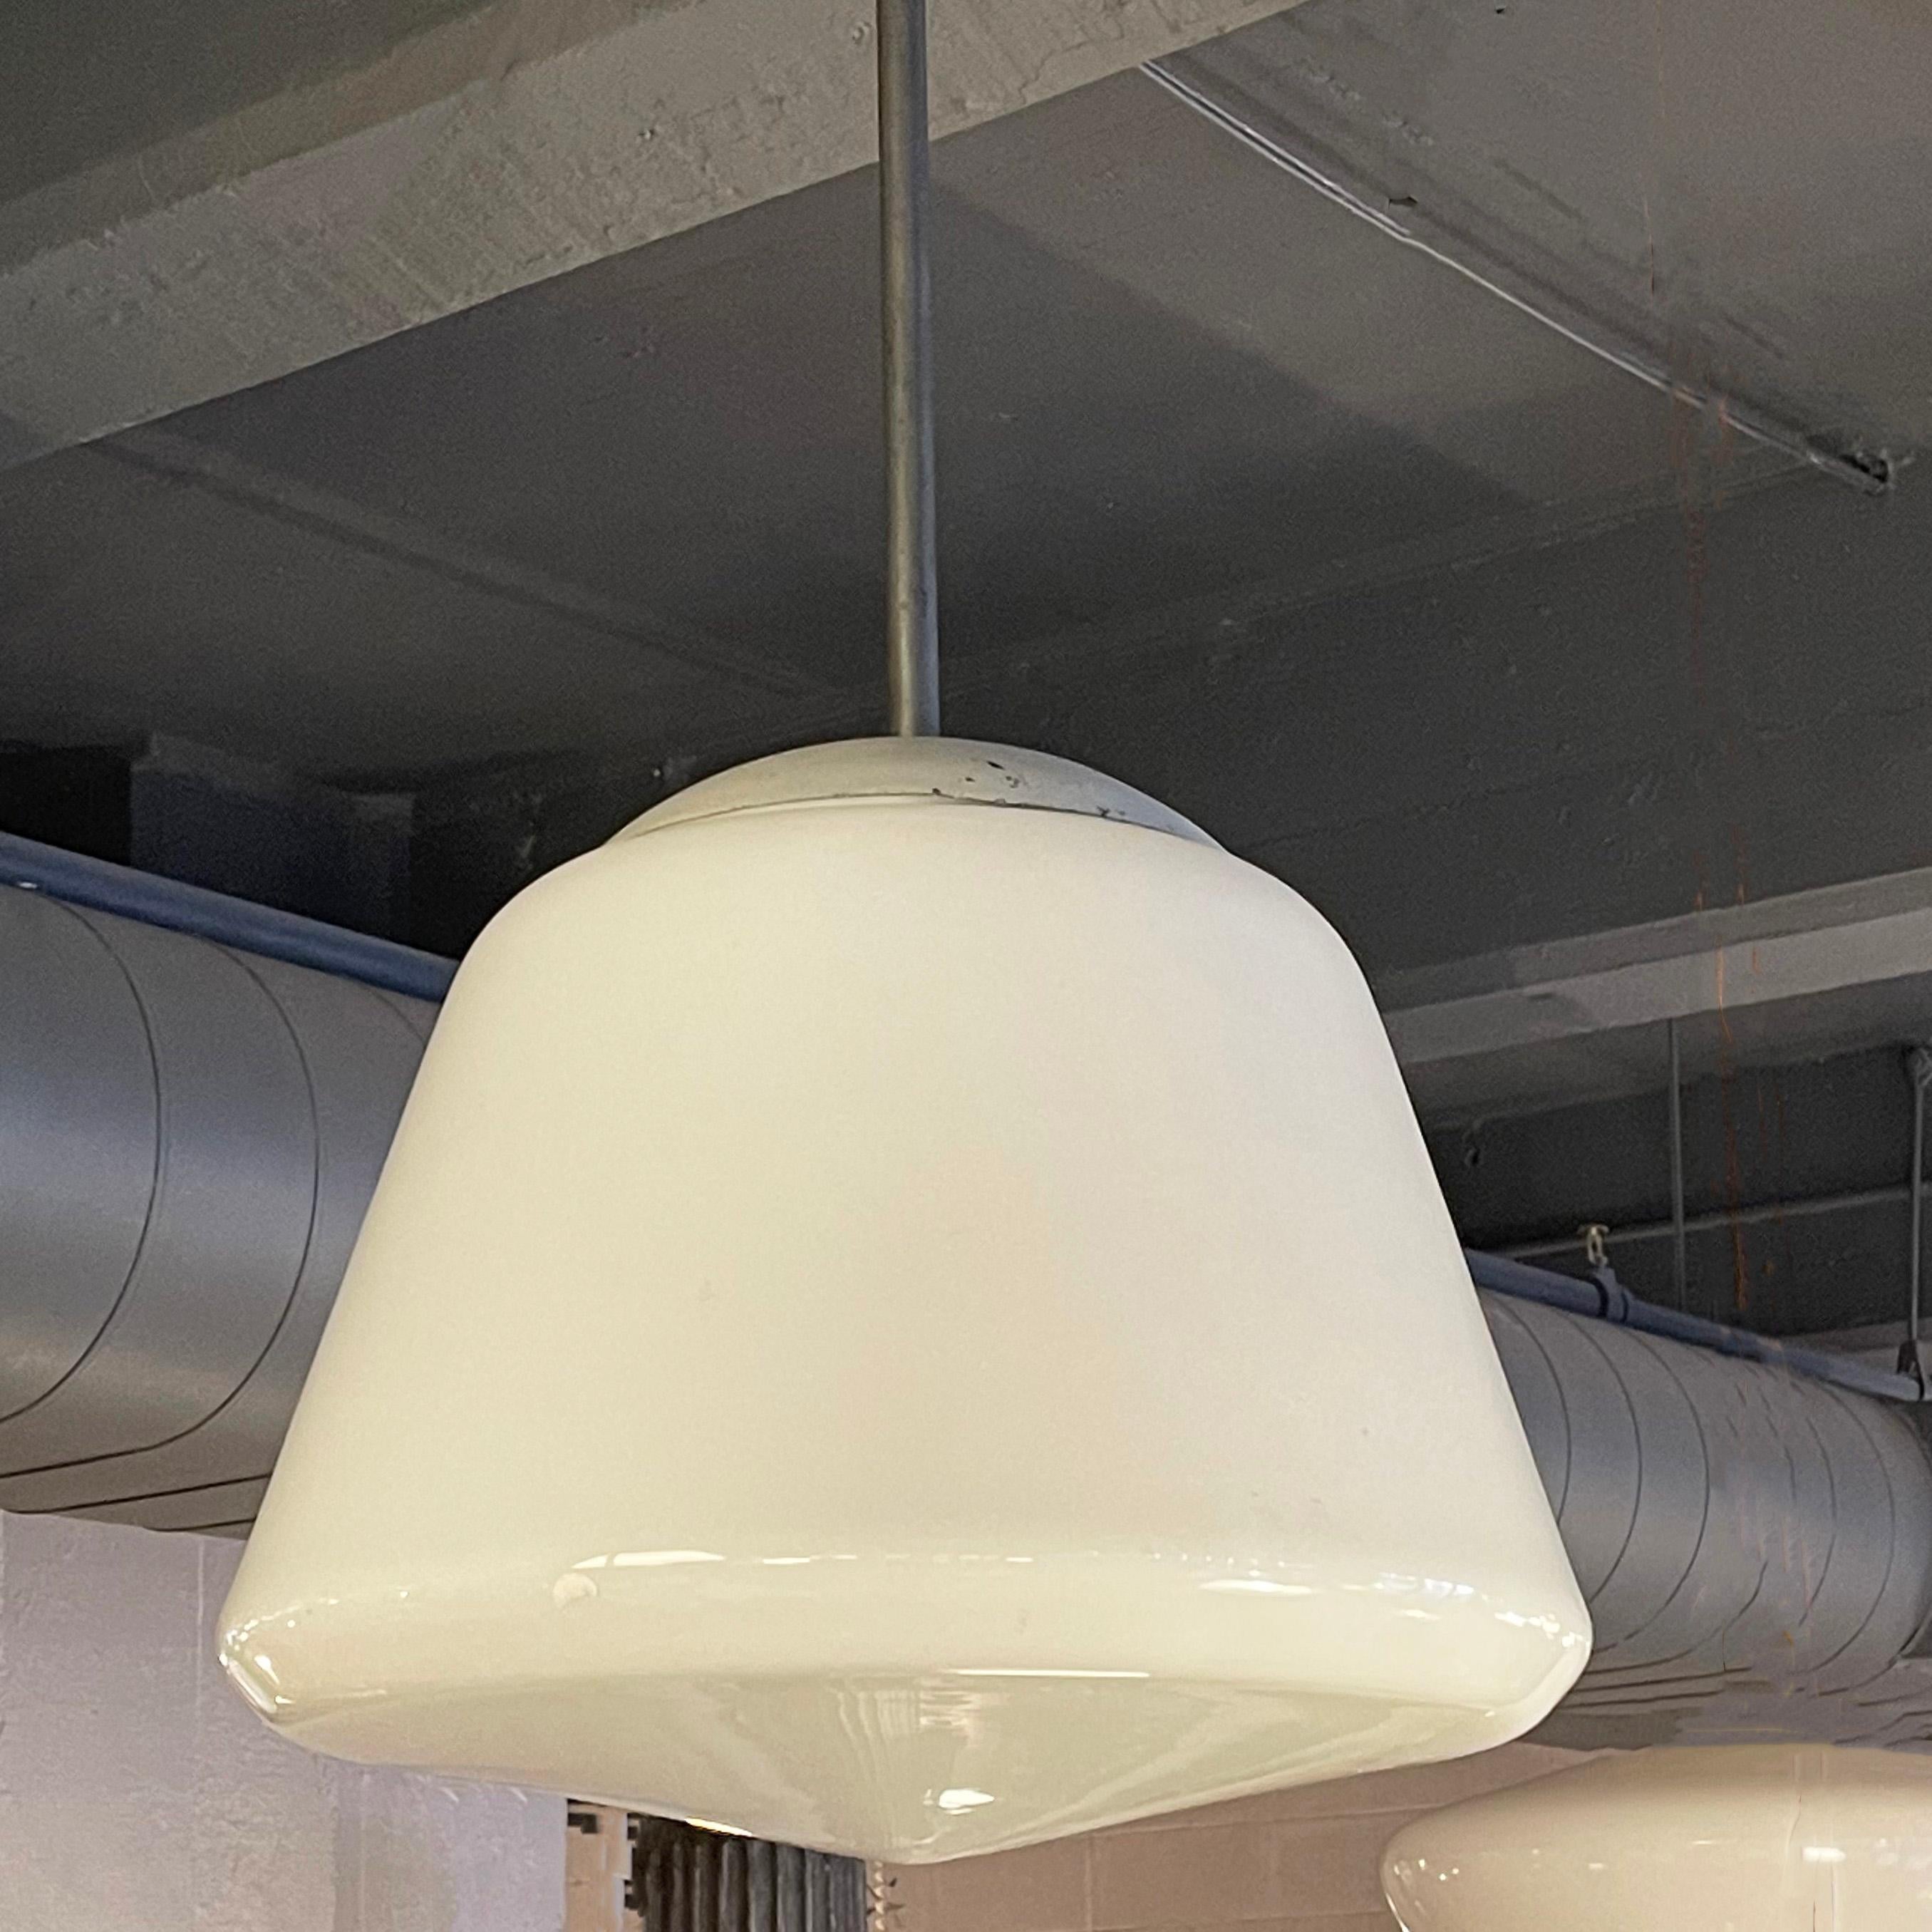 Large, midcentury, library pendant lights circa 1960's feature conical milk glass shades on blackened steel poles. The shades measure 16 inches diameter x 13 inches height. Five pendants are available, sold individually.